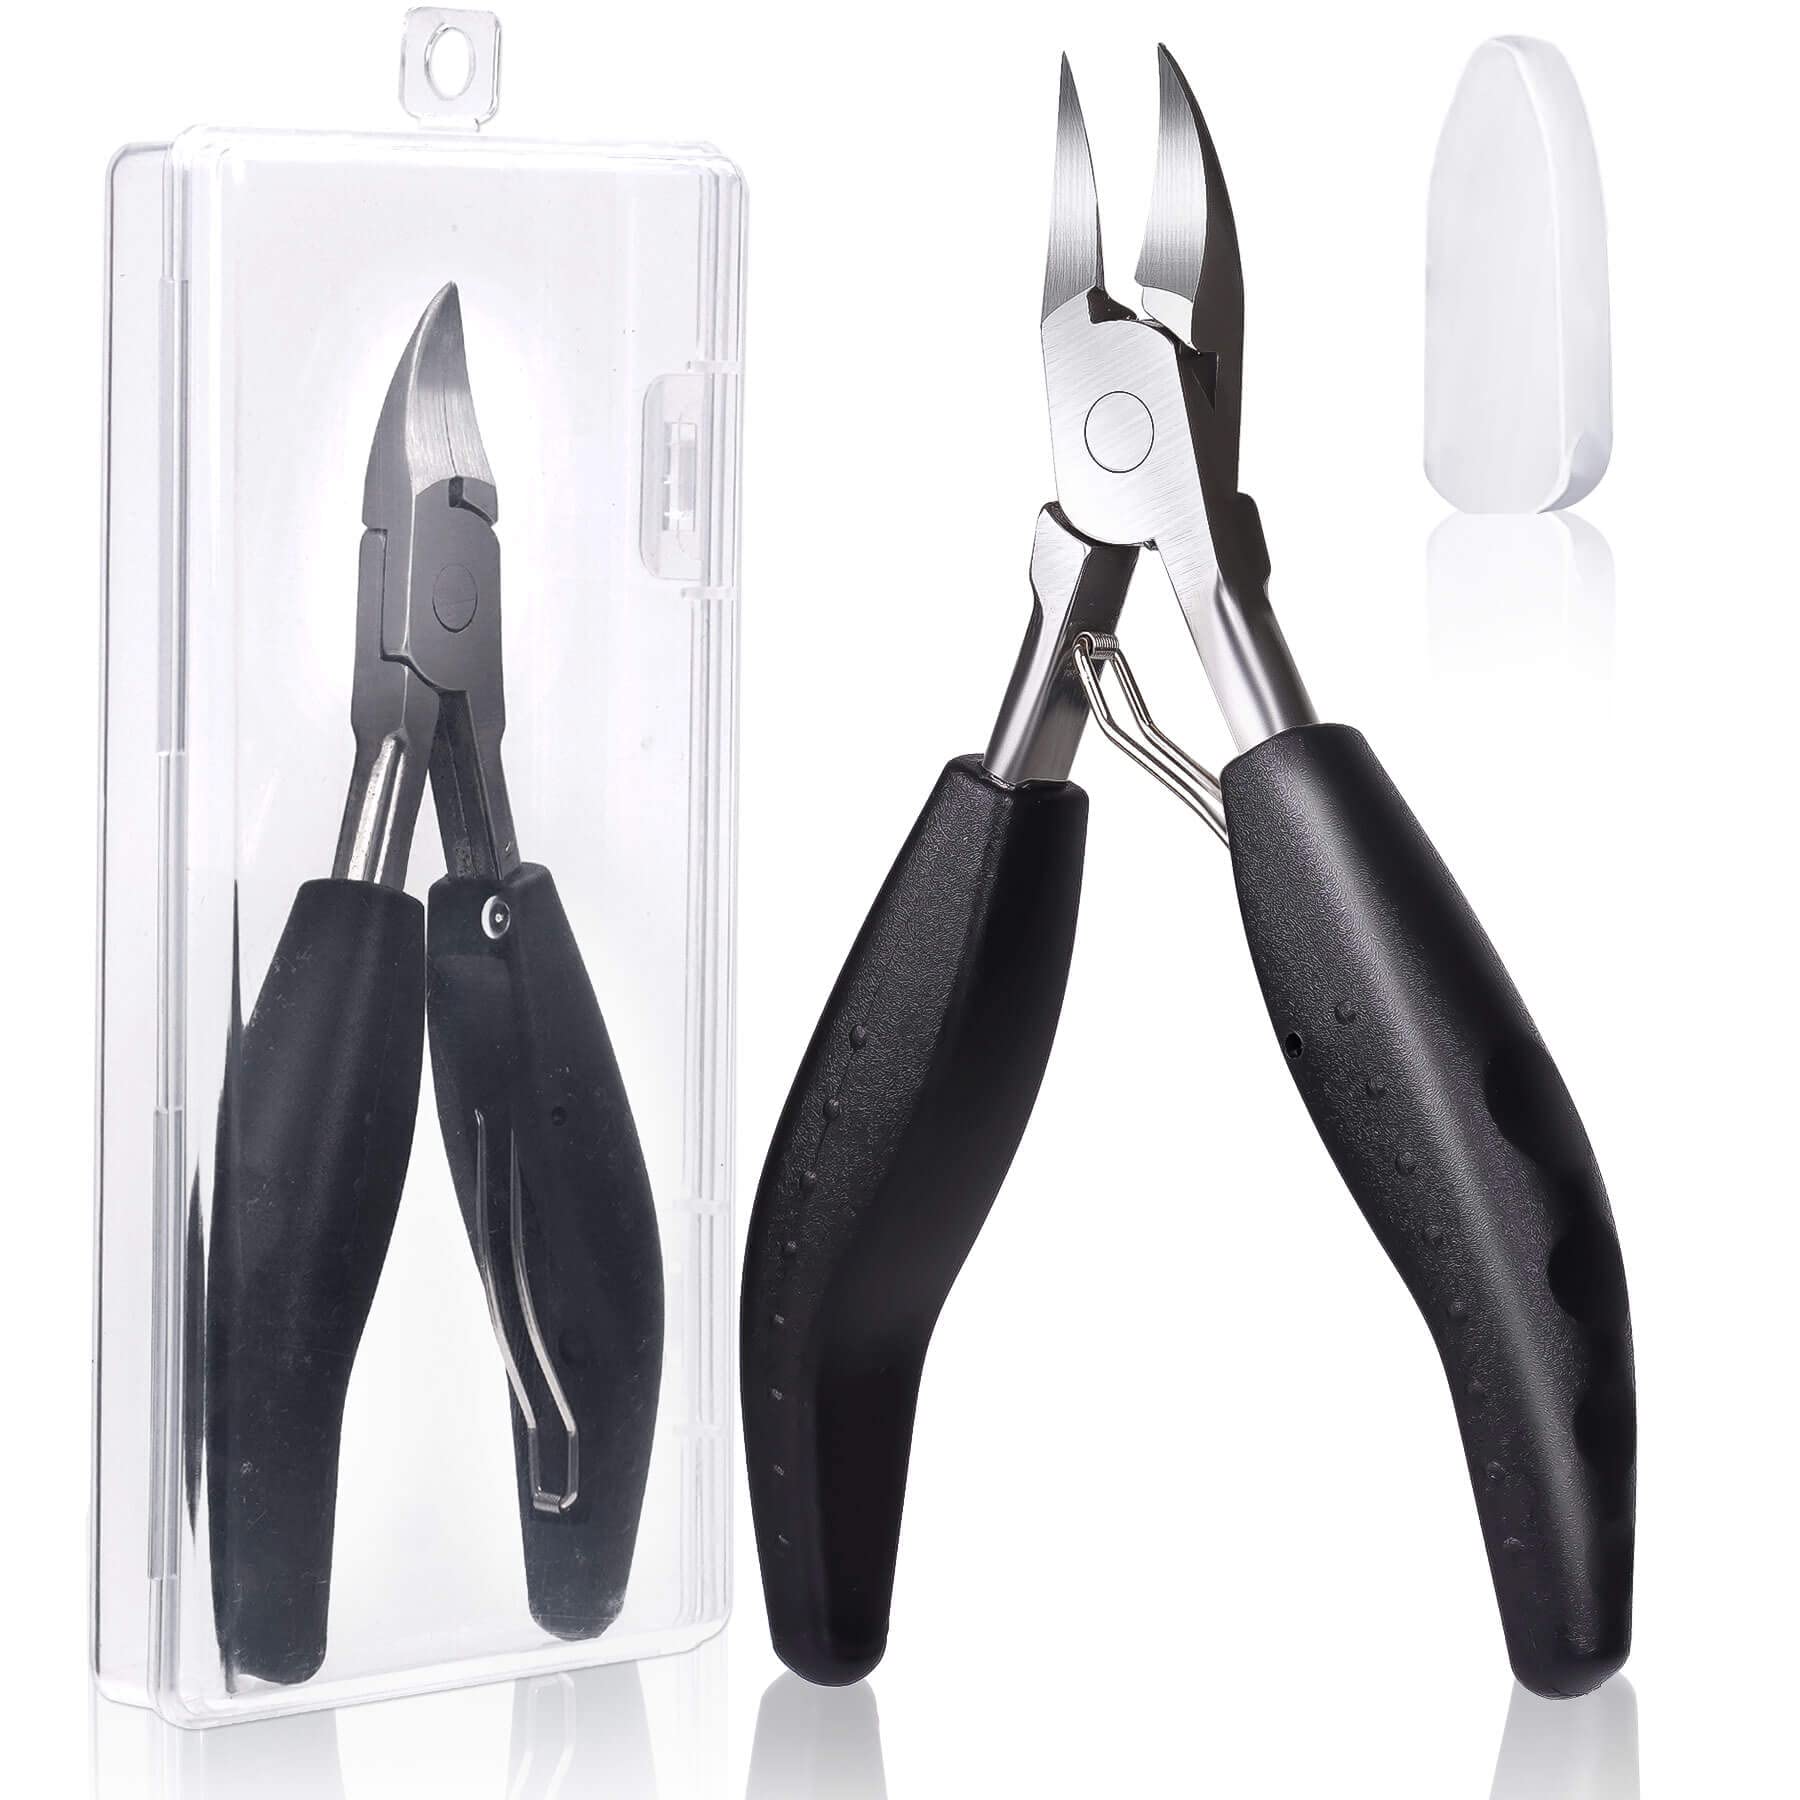 Toenail Clippers for Thick, Fungal or Ingrown Toenails, Heavy Duty